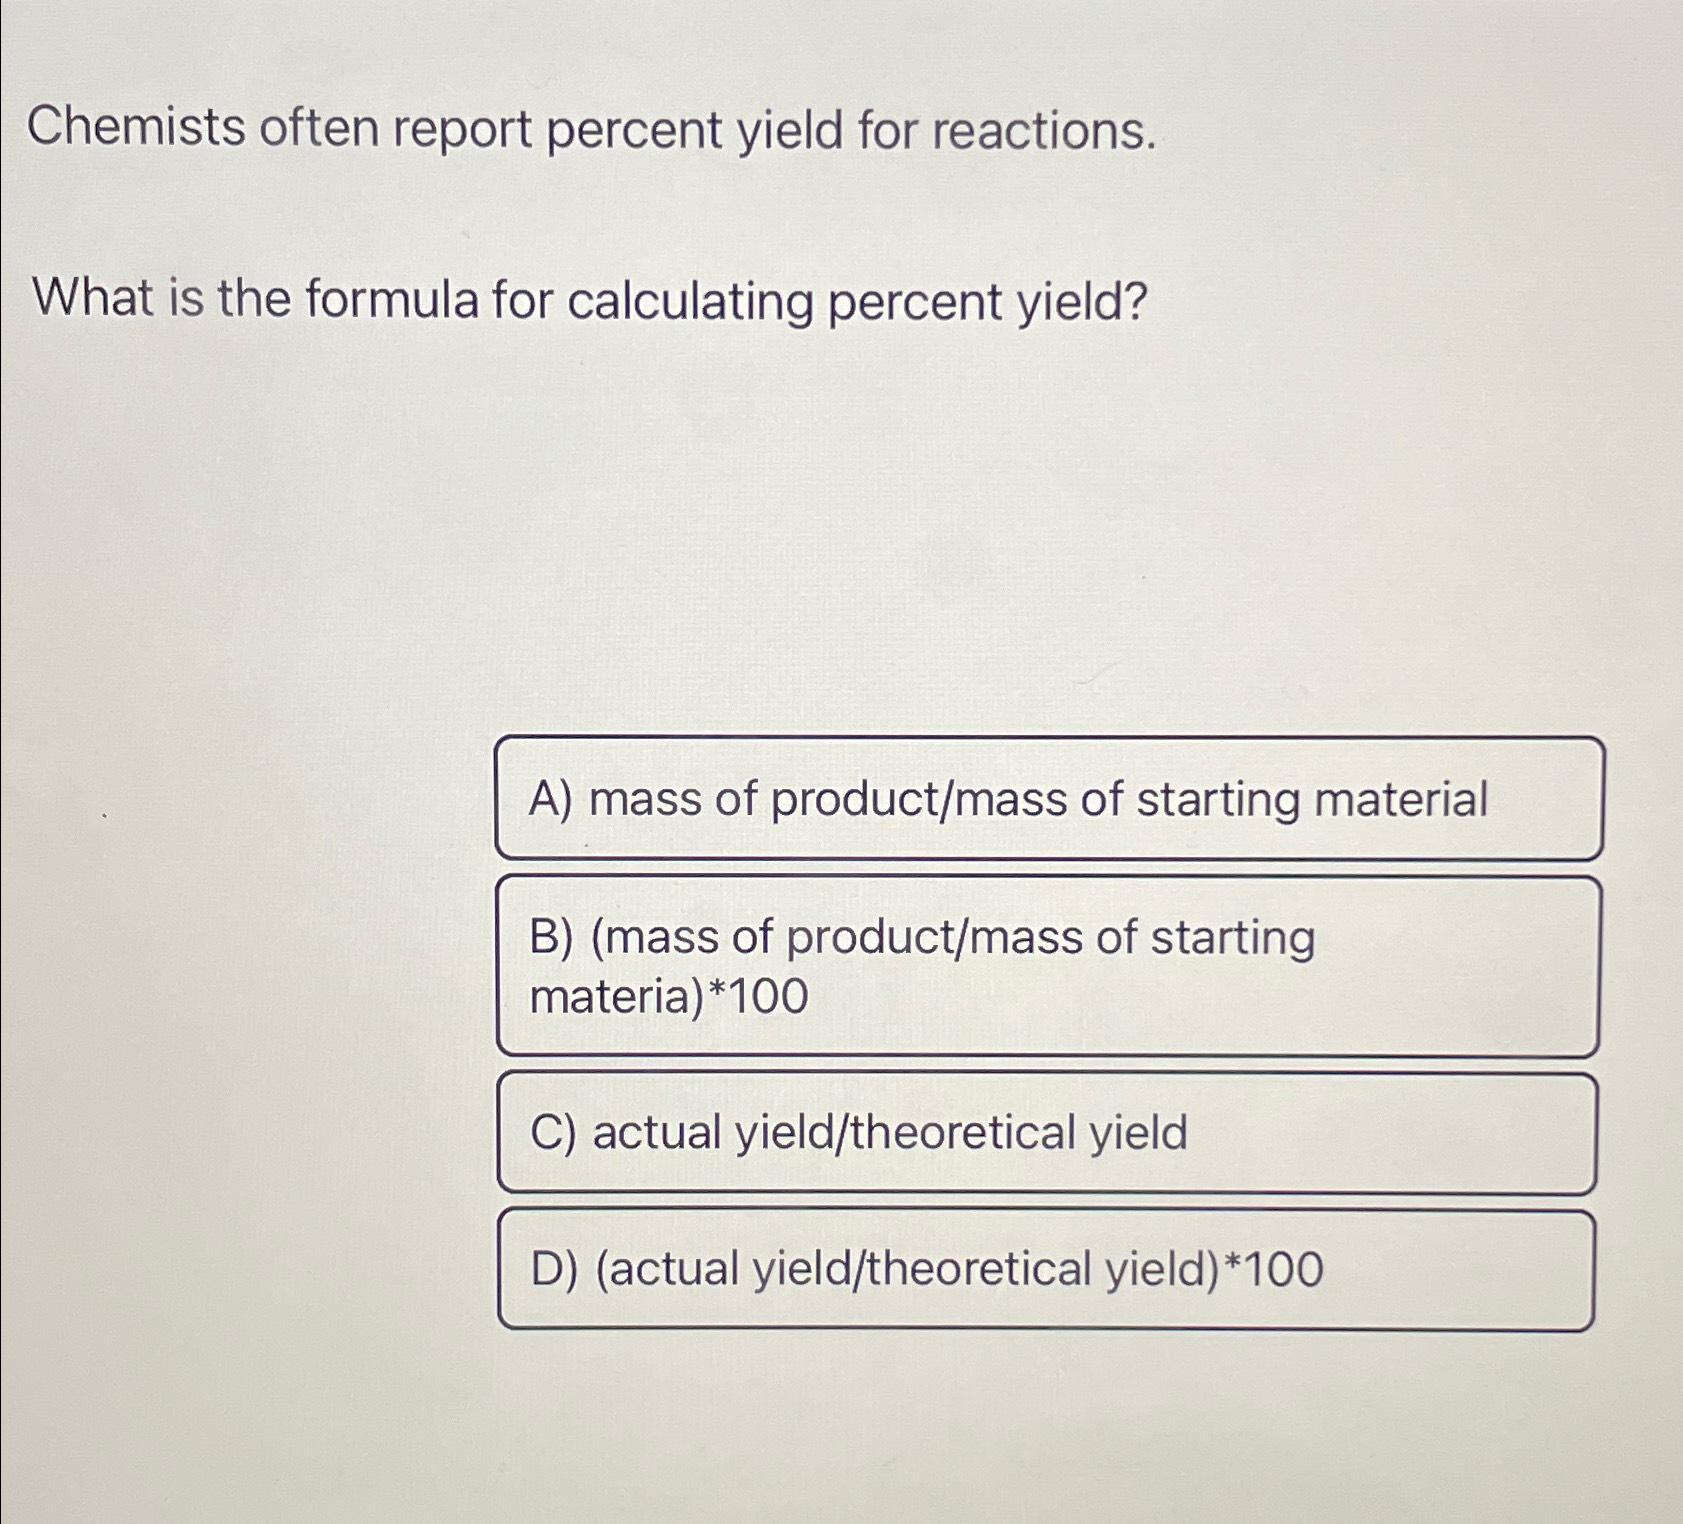 Chemists often report percent yield for reactions. What is the formula for calculating percent yield? A) mass